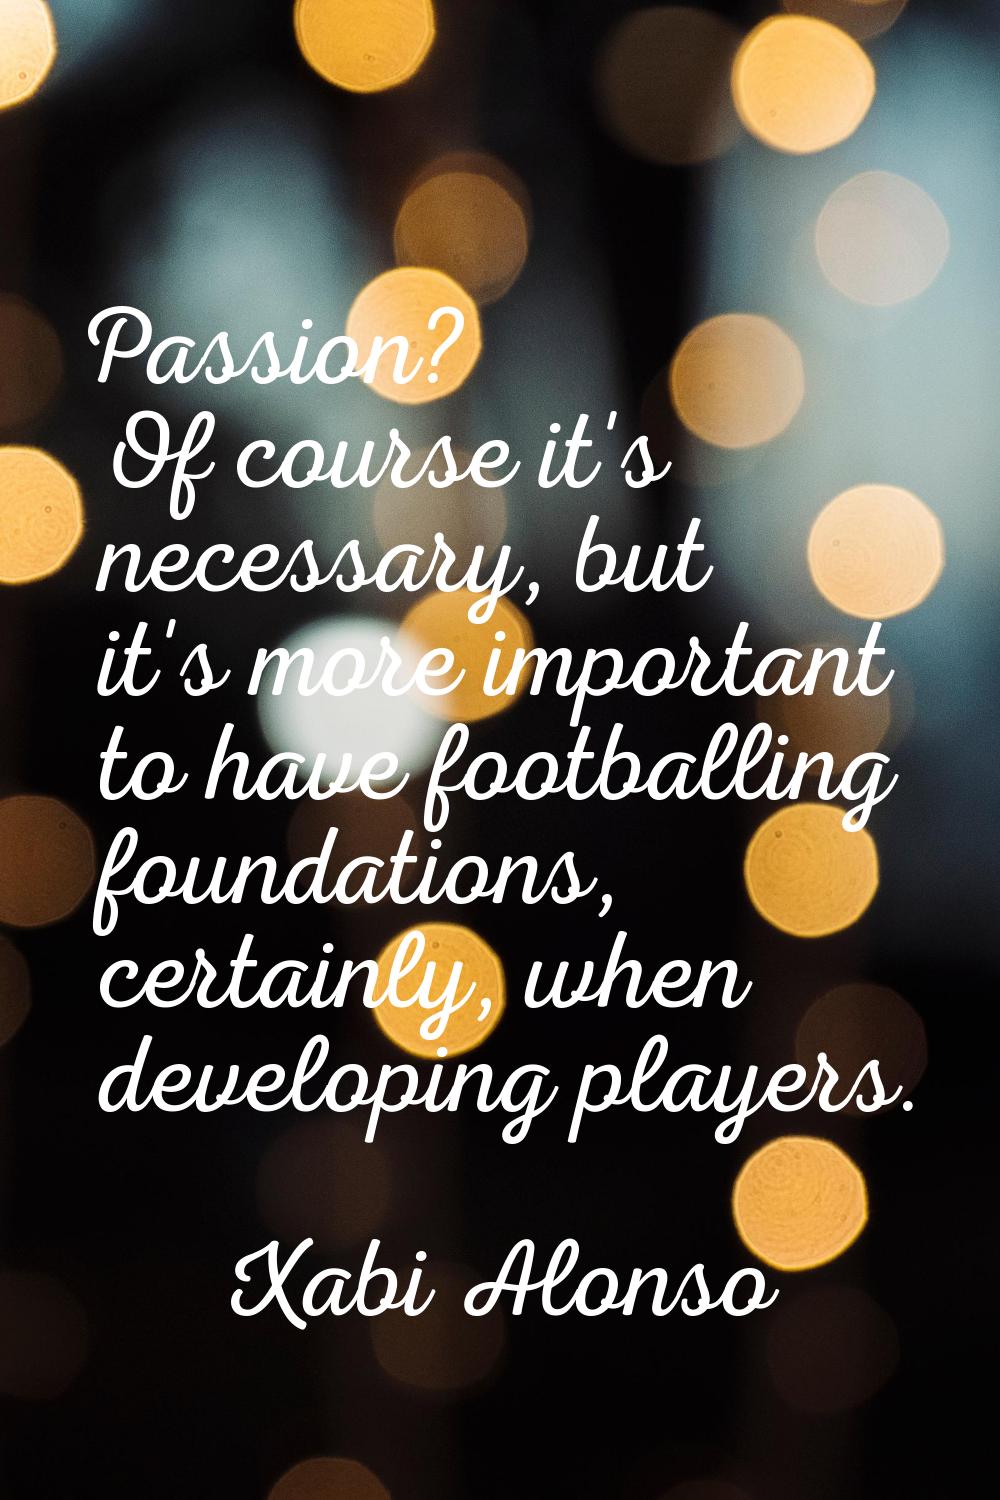 Passion? Of course it's necessary, but it's more important to have footballing foundations, certain